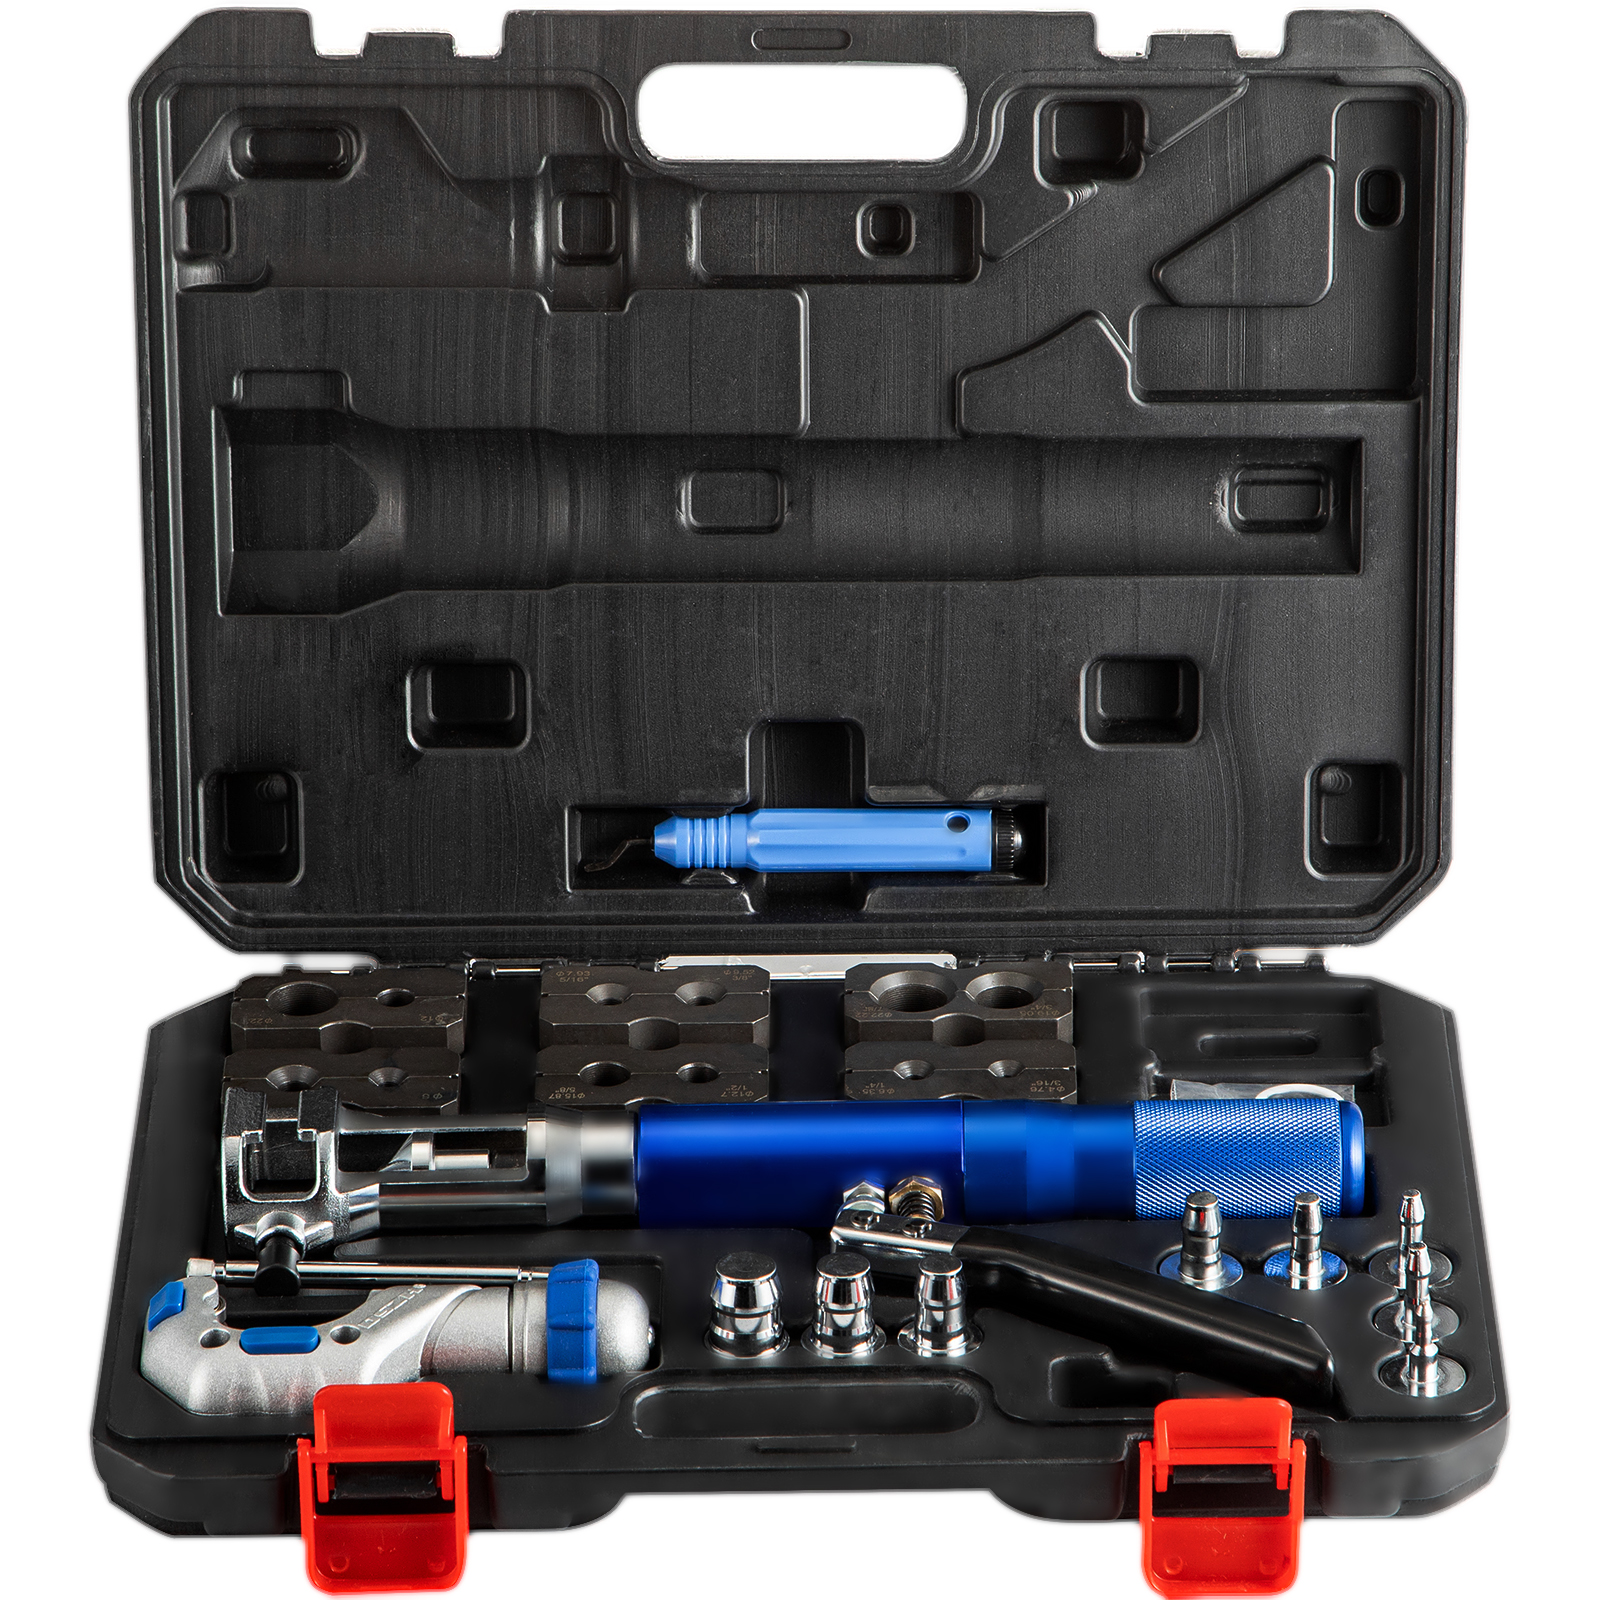 Details about   WK-400 Hydraulic Flaring Tool Set Tube Expander Pipe Fuel Line tool Cutter